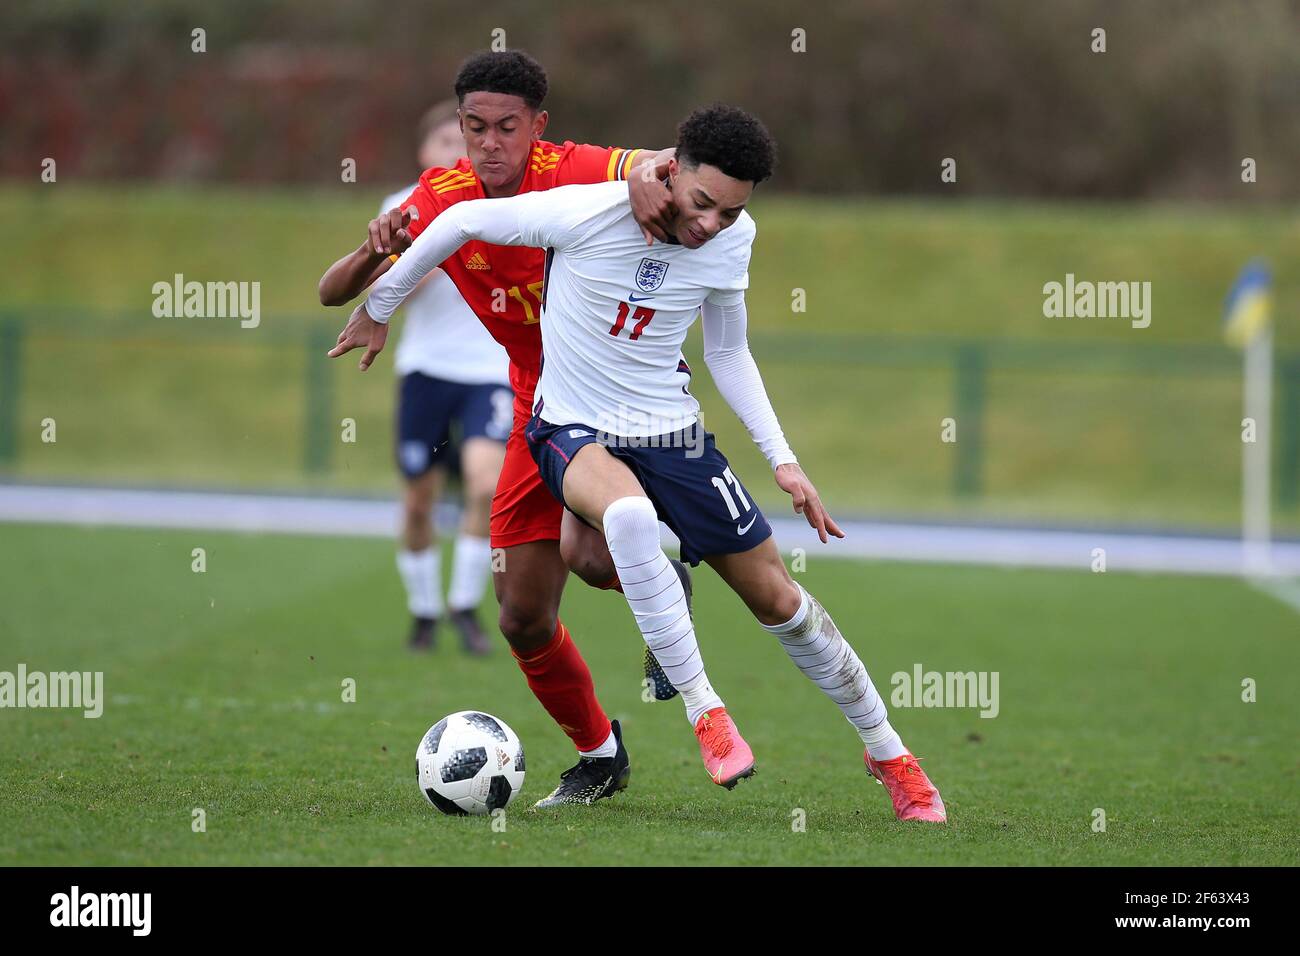 Cardiff, UK. 29th Mar, 2021. Samuel Edozie of England u18's and Zac Bell of Wales u18's (l) in action. U18 Football international match, Wales v England, at the Leckwith stadium in Cardiff, South Wales on Monday 29th March 2021. Editorial use only. pic by Andrew Orchard/Andrew Orchard sports photography/Alamy Live News Credit: Andrew Orchard sports photography/Alamy Live News Stock Photo